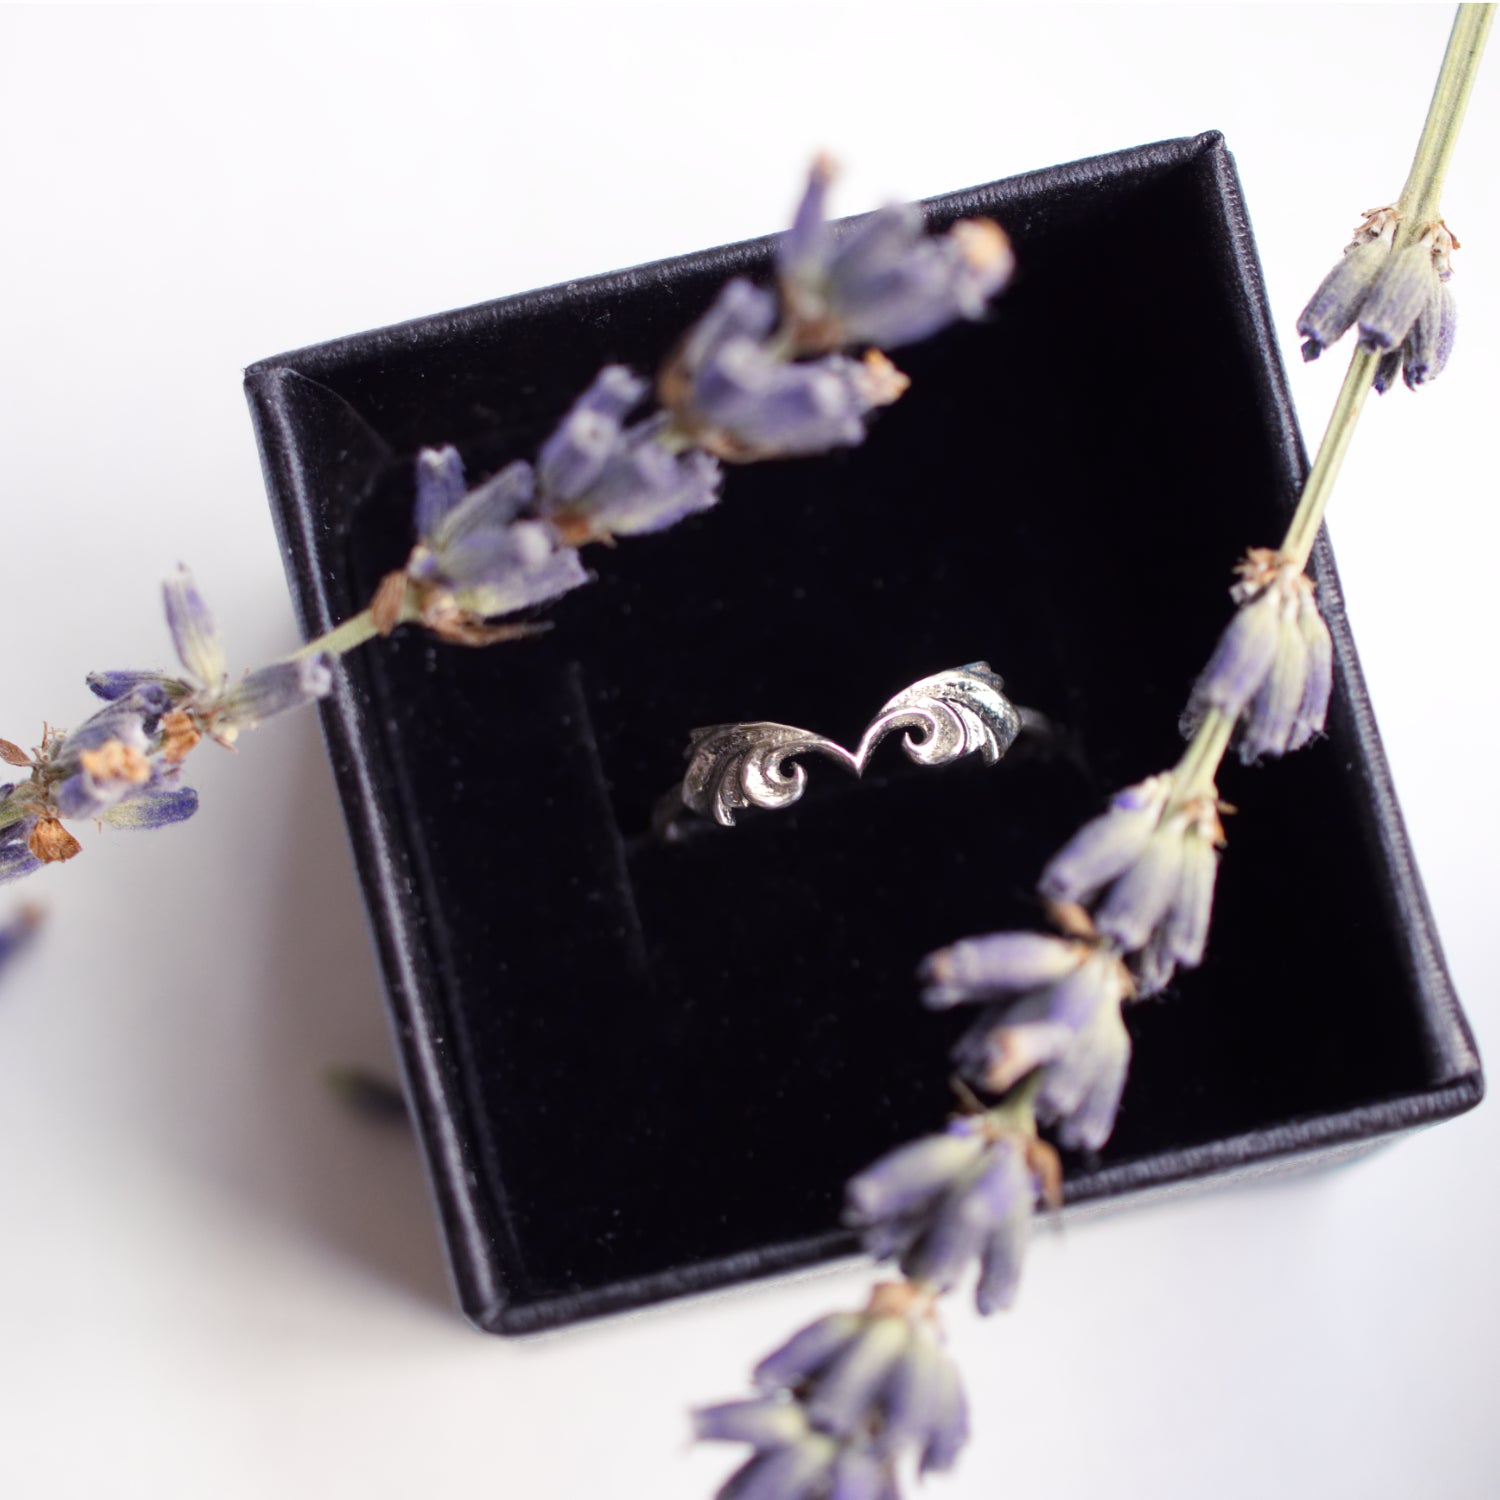 Jewelry - Flutter Ring - Two Perfect Souls